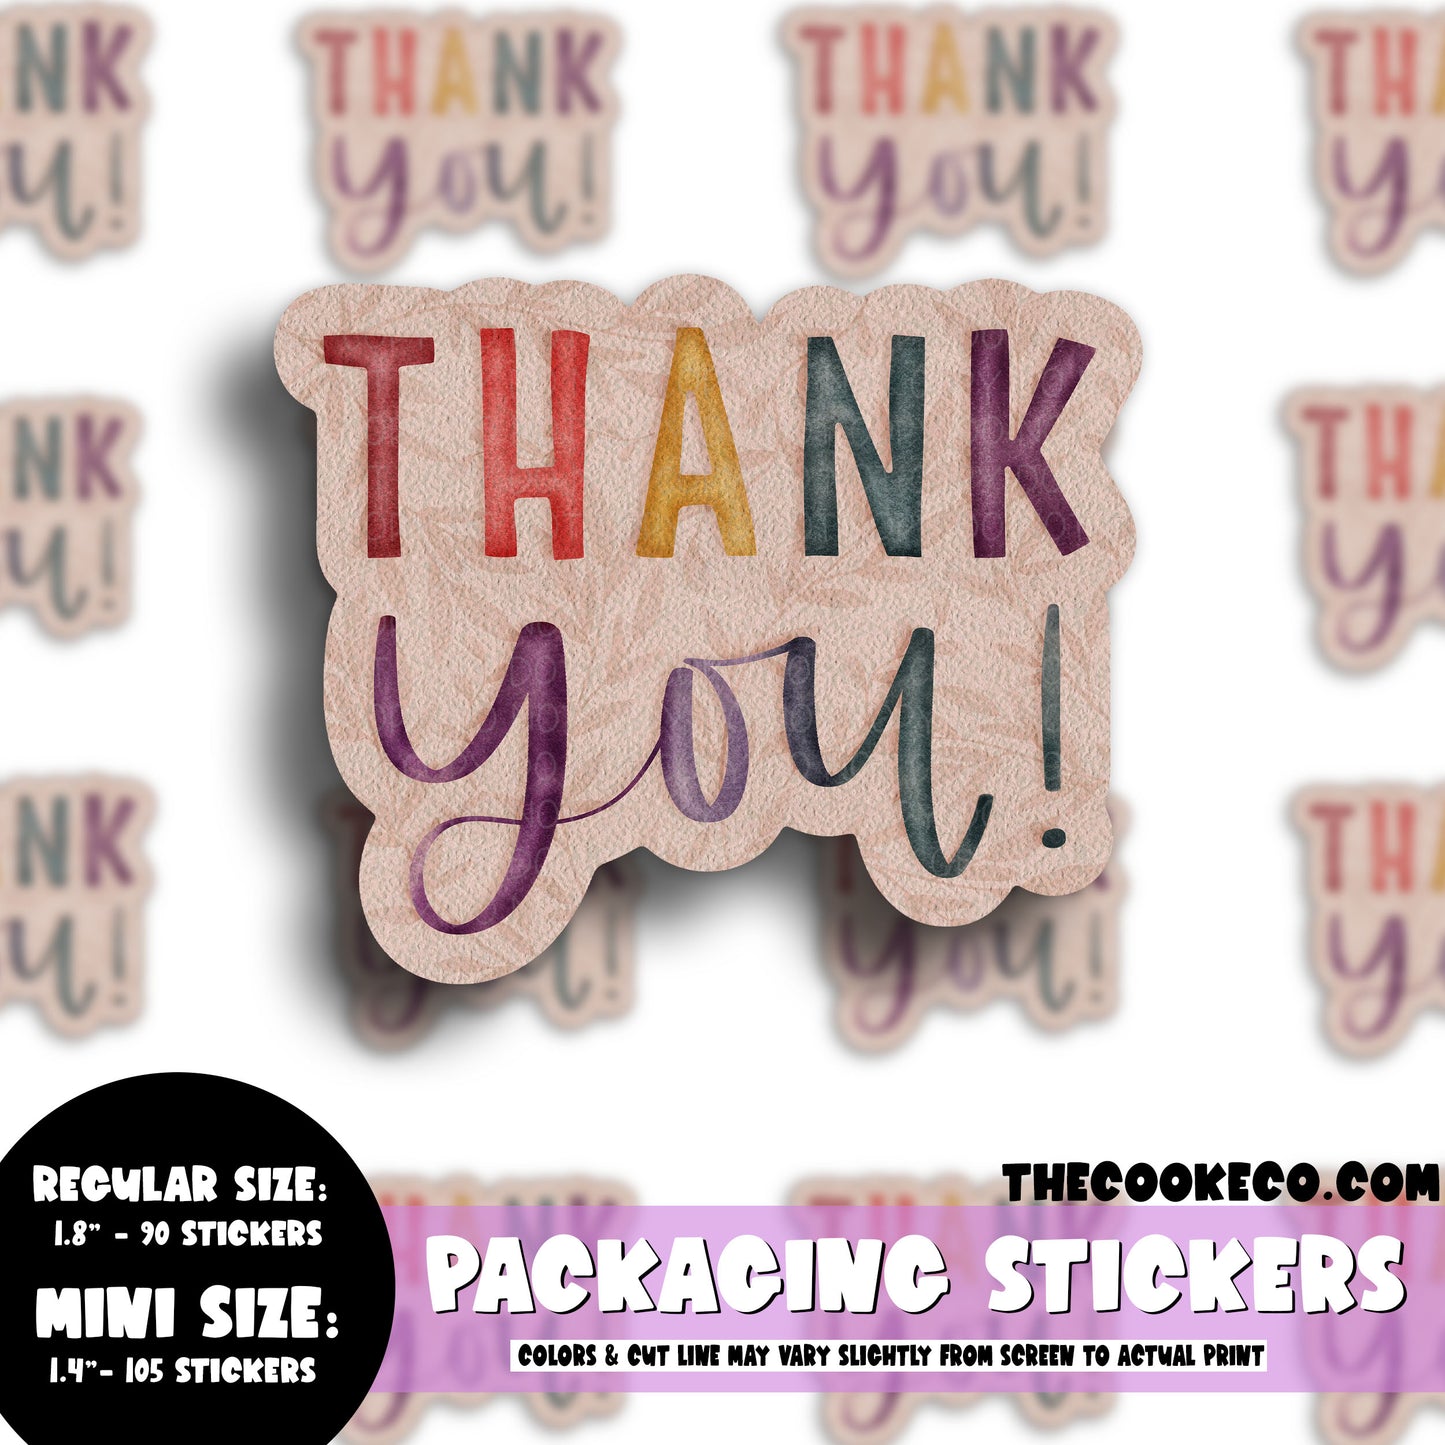 PTO Packaging Stickers | #C0735 - THANK YOU